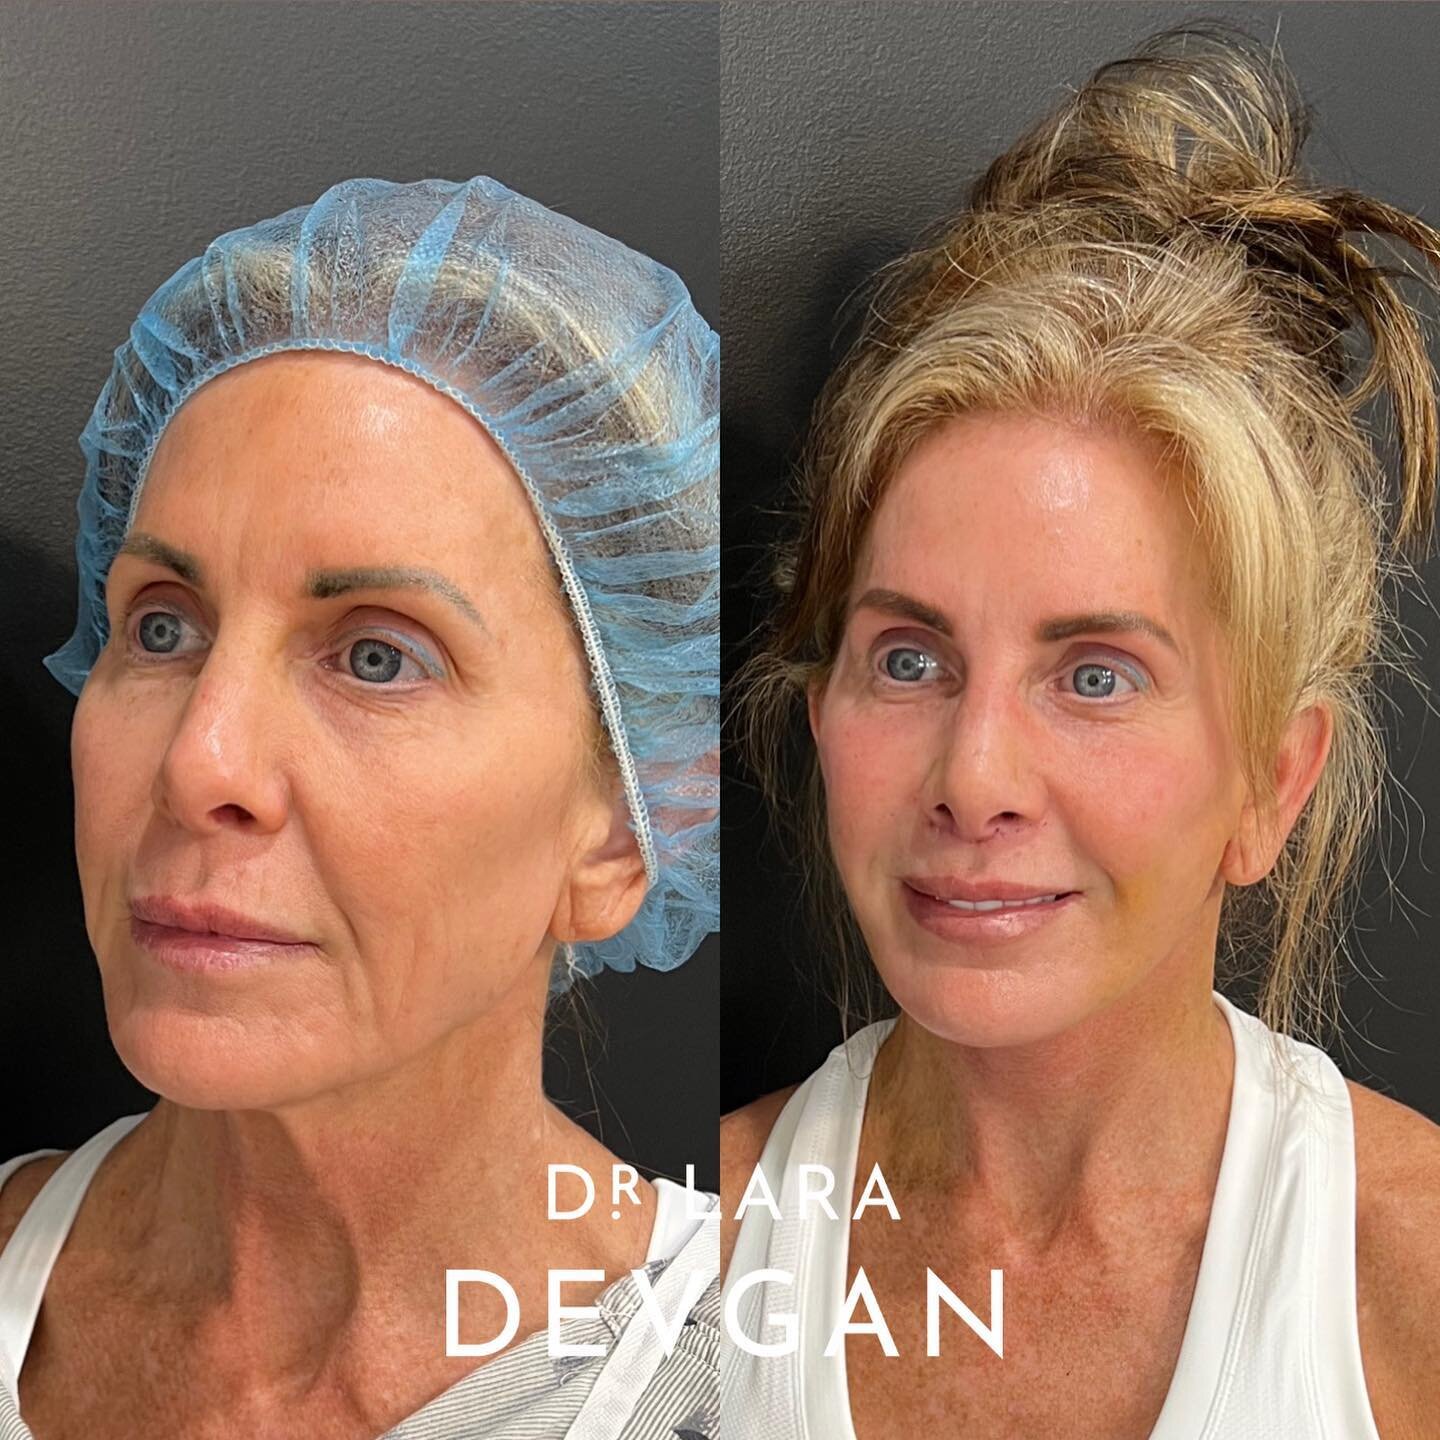 Gorgeous healing 6 days after global surgical facial optimization 📐📐📐 Midface lift, lower facelift, necklift, autologous fat grafting for eye area and mid face rejuvenating, lip lift, revision nasal surgery, and erbium laser. Her healing will keep